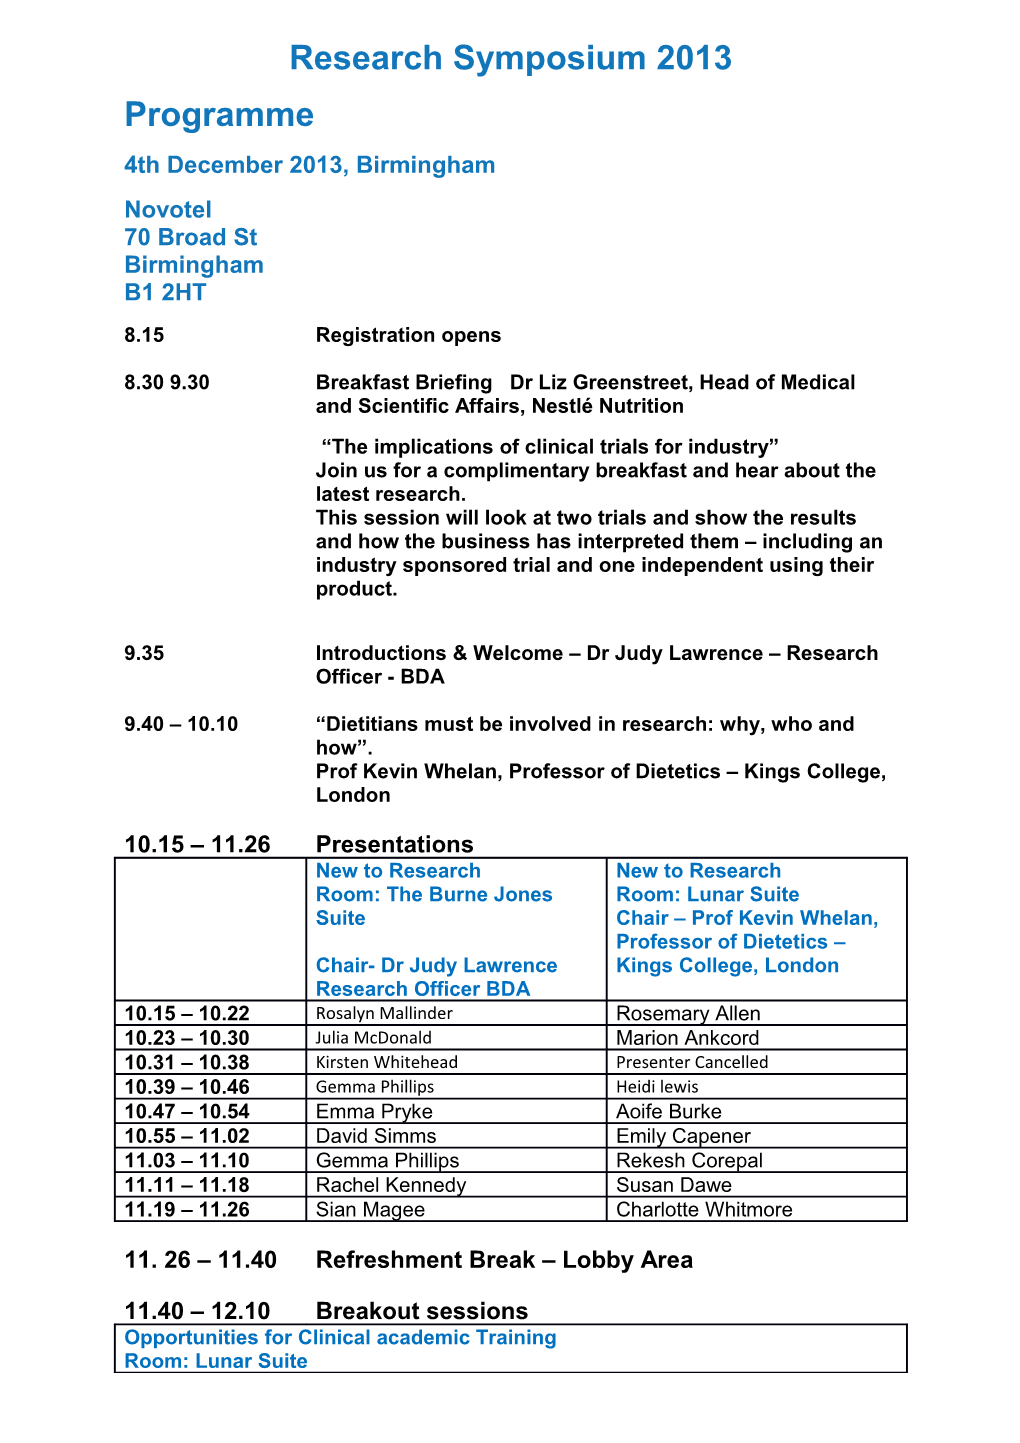 Research Symposium Programme